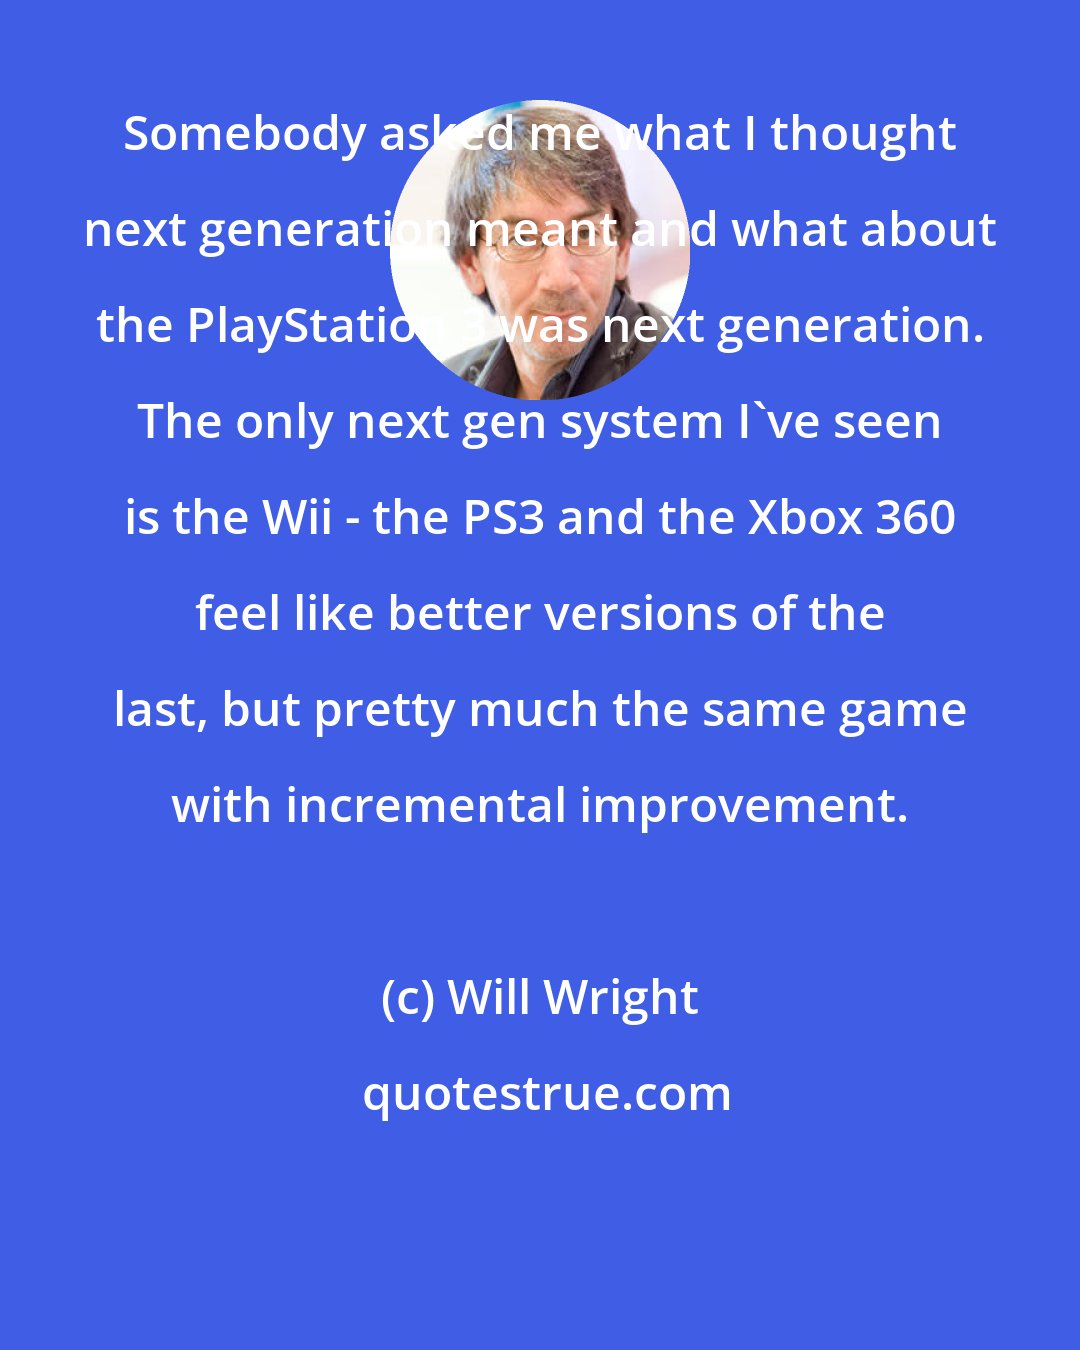 Will Wright: Somebody asked me what I thought next generation meant and what about the PlayStation 3 was next generation. The only next gen system I've seen is the Wii - the PS3 and the Xbox 360 feel like better versions of the last, but pretty much the same game with incremental improvement.